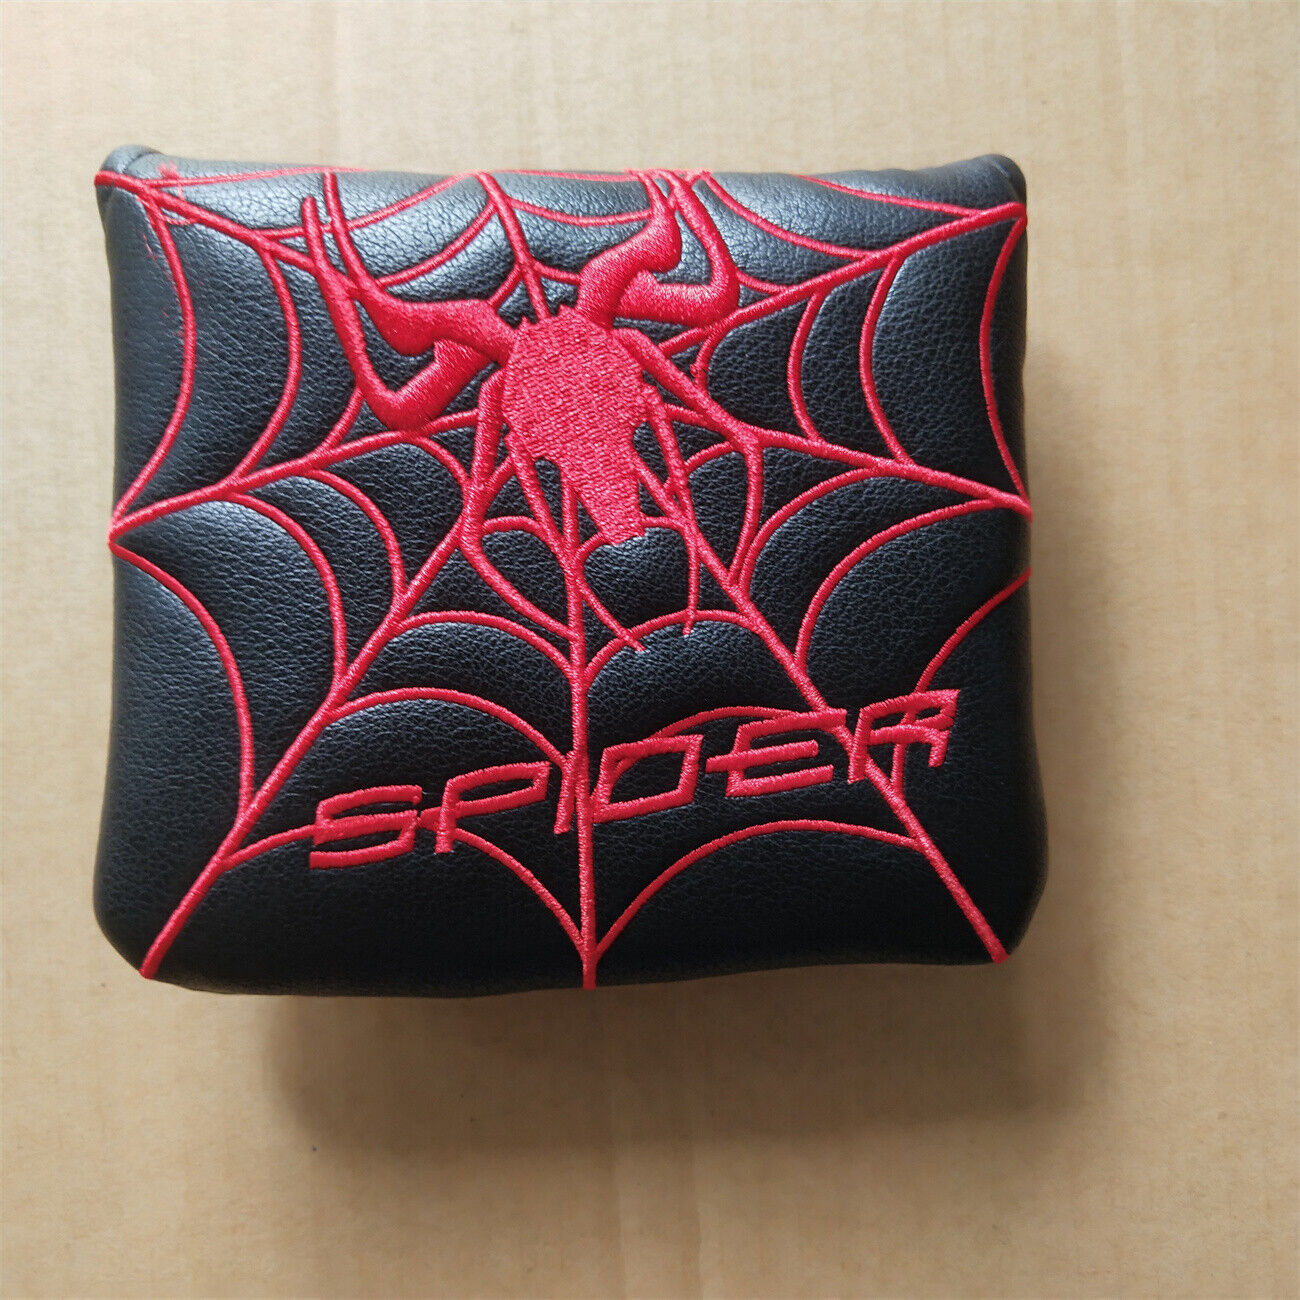 Black/Red Spider Golf Square Mallet Putter Headcover Magnet Cover for Taylormade